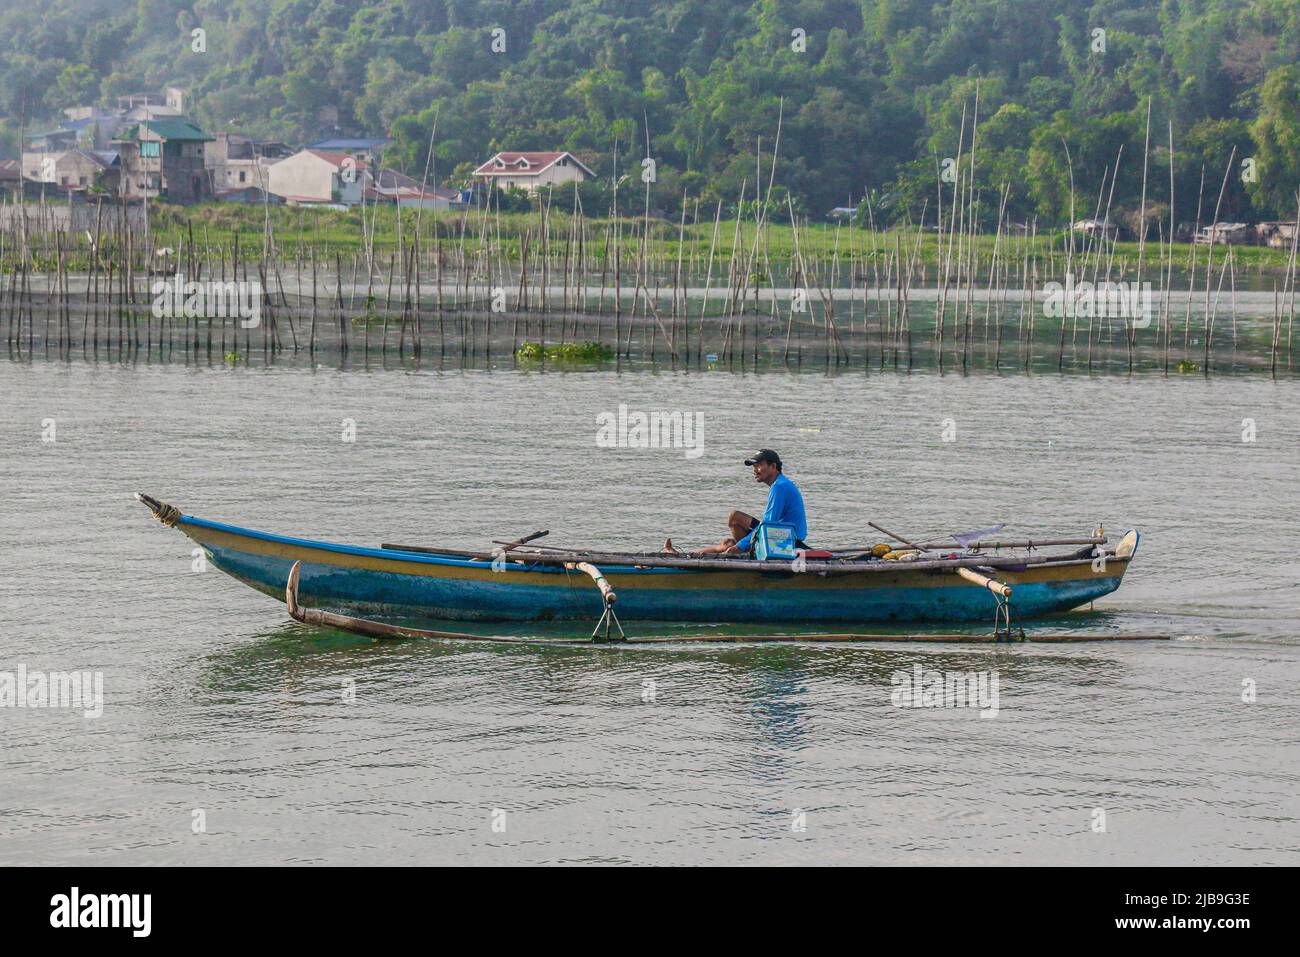 Binangonan, Philippines. 04th June, 2022. A fisherman rows his boat off to take a chance on catching a fish. Laguna Lake is the largest lake in the Philippines, covering a surface of 900 square kilometers or equivalent to 90,000 hectares. Its water runs from Laguna Province all the way to the Province of Rizal, the southern part of Luzon. The lake provides resources like transportation, recreation, livelihood, and most importantly food for the surrounding communities. Laguna Lake is classified as Class C freshwater which has the capability to grow fish and other aquatic resources. Some watersh Stock Photo